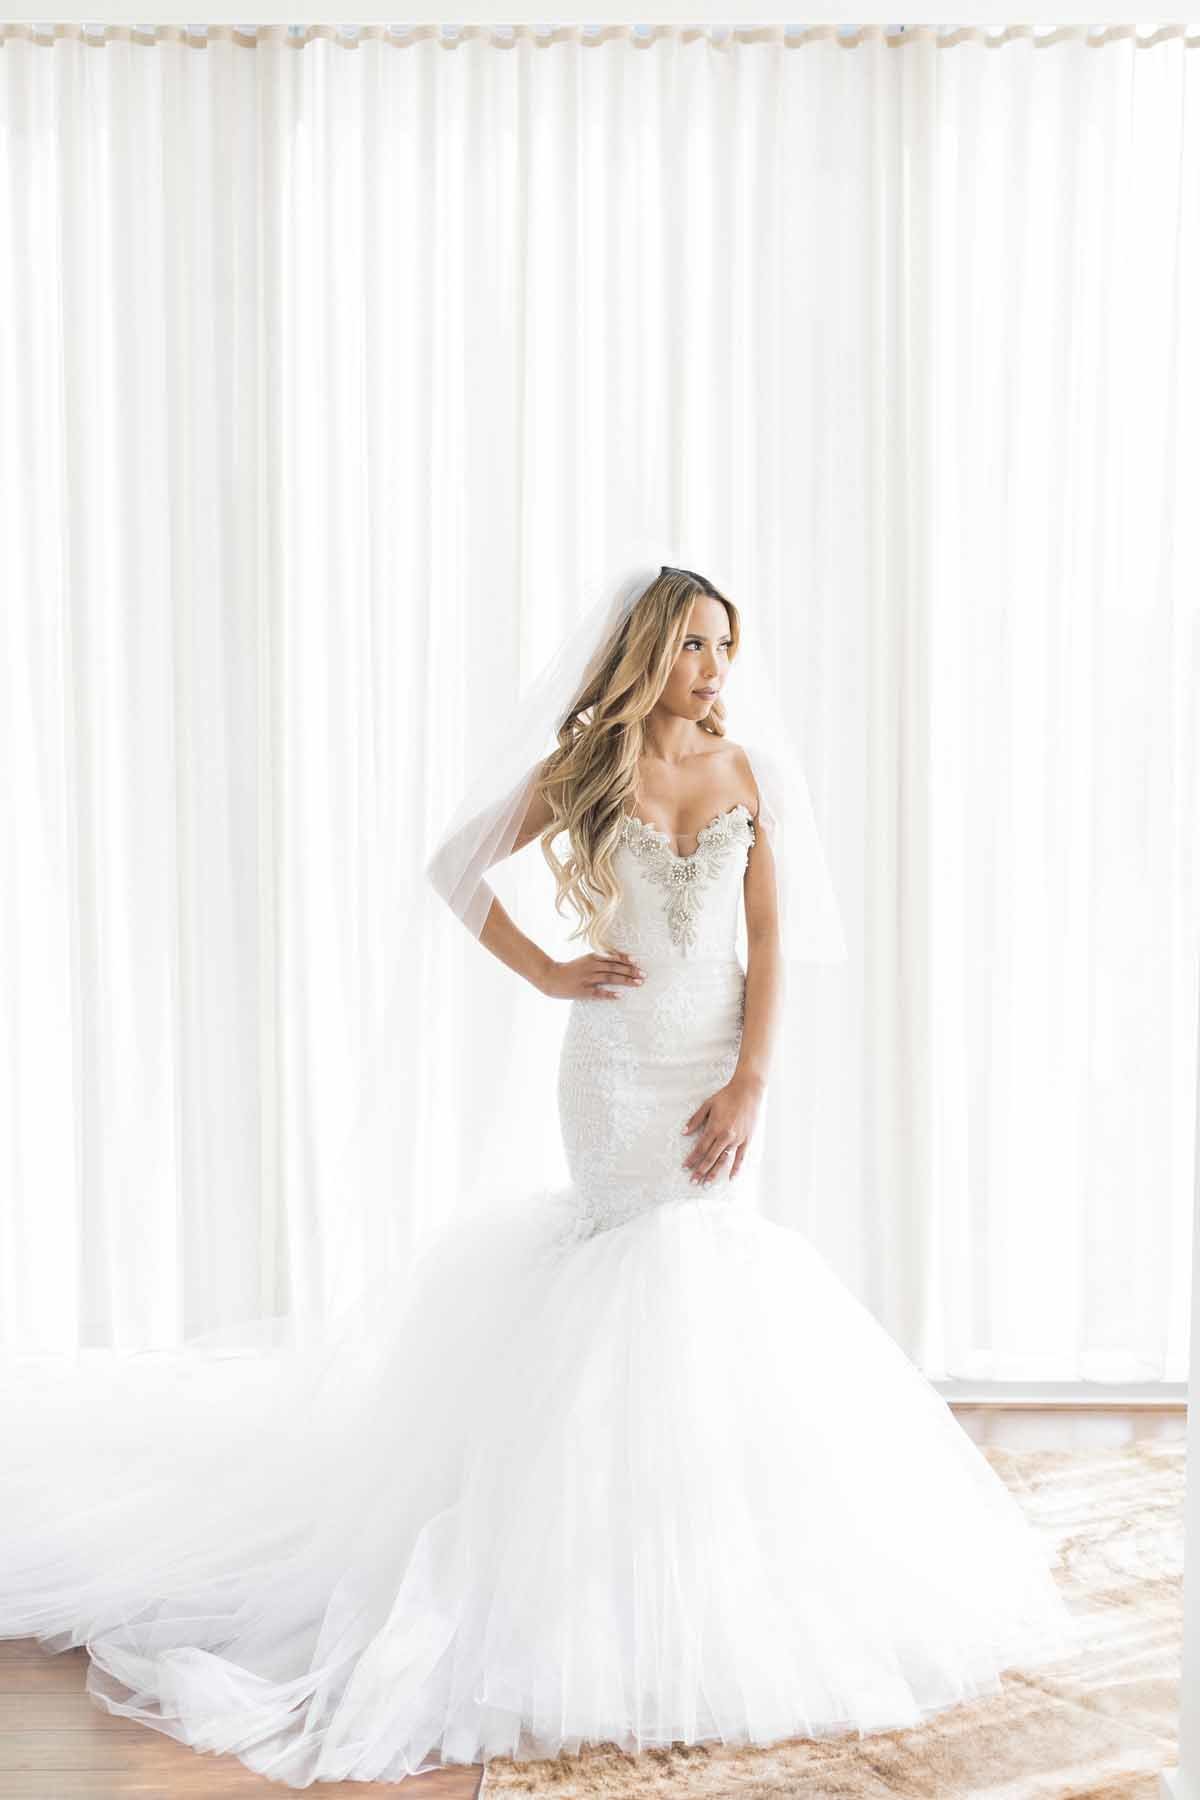 Our stunning bride in her amazing mermaid dress at canvas event space seattle